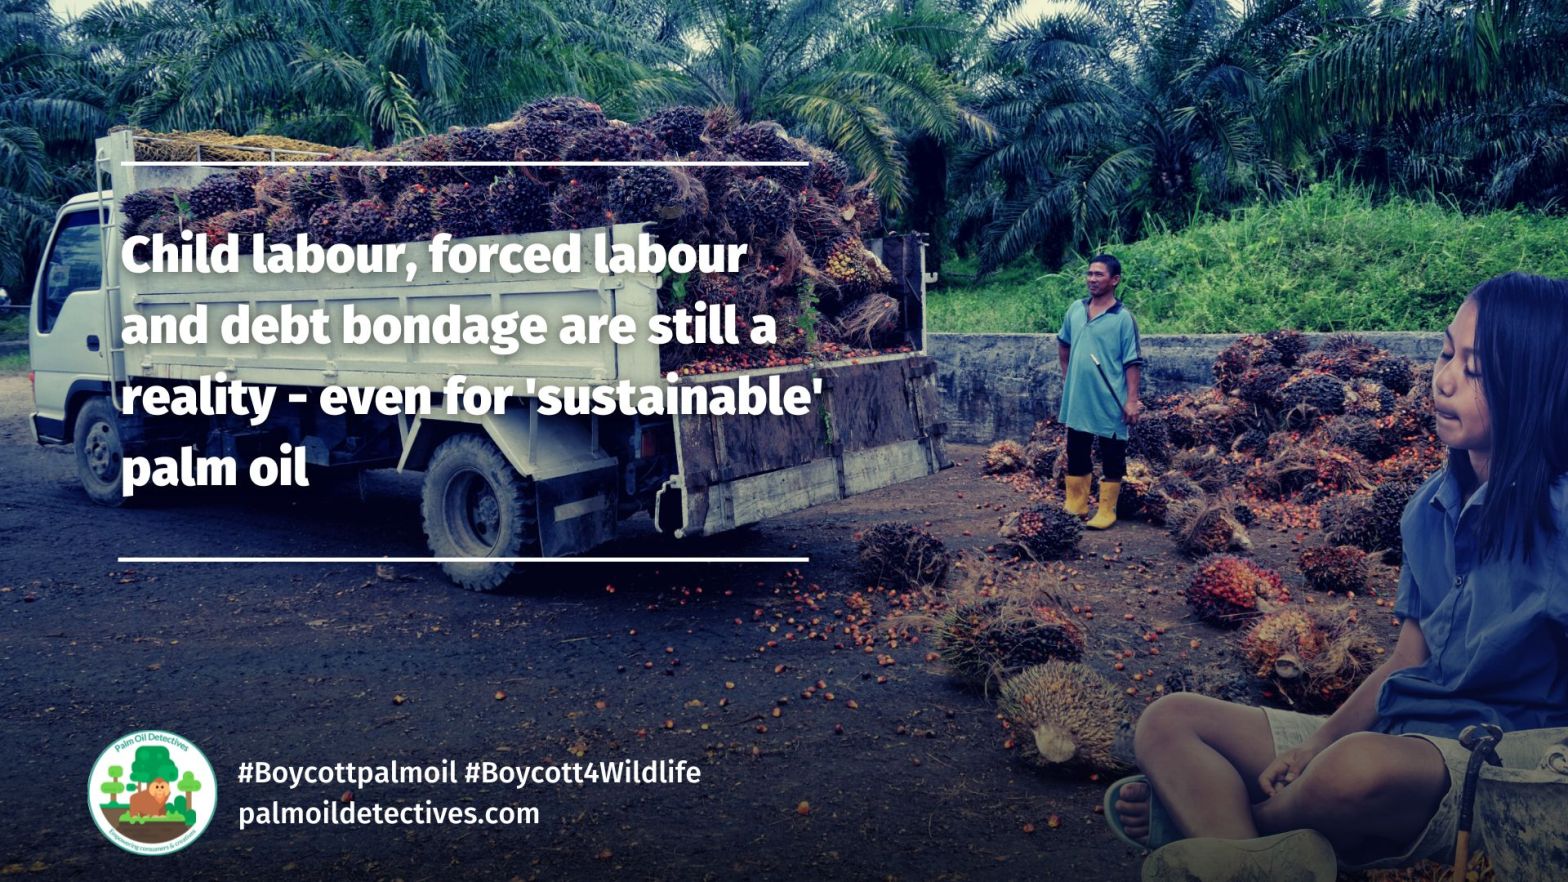 Child labour, forced labour and debt bondage are still a reality - even for 'sustainable' palm oil